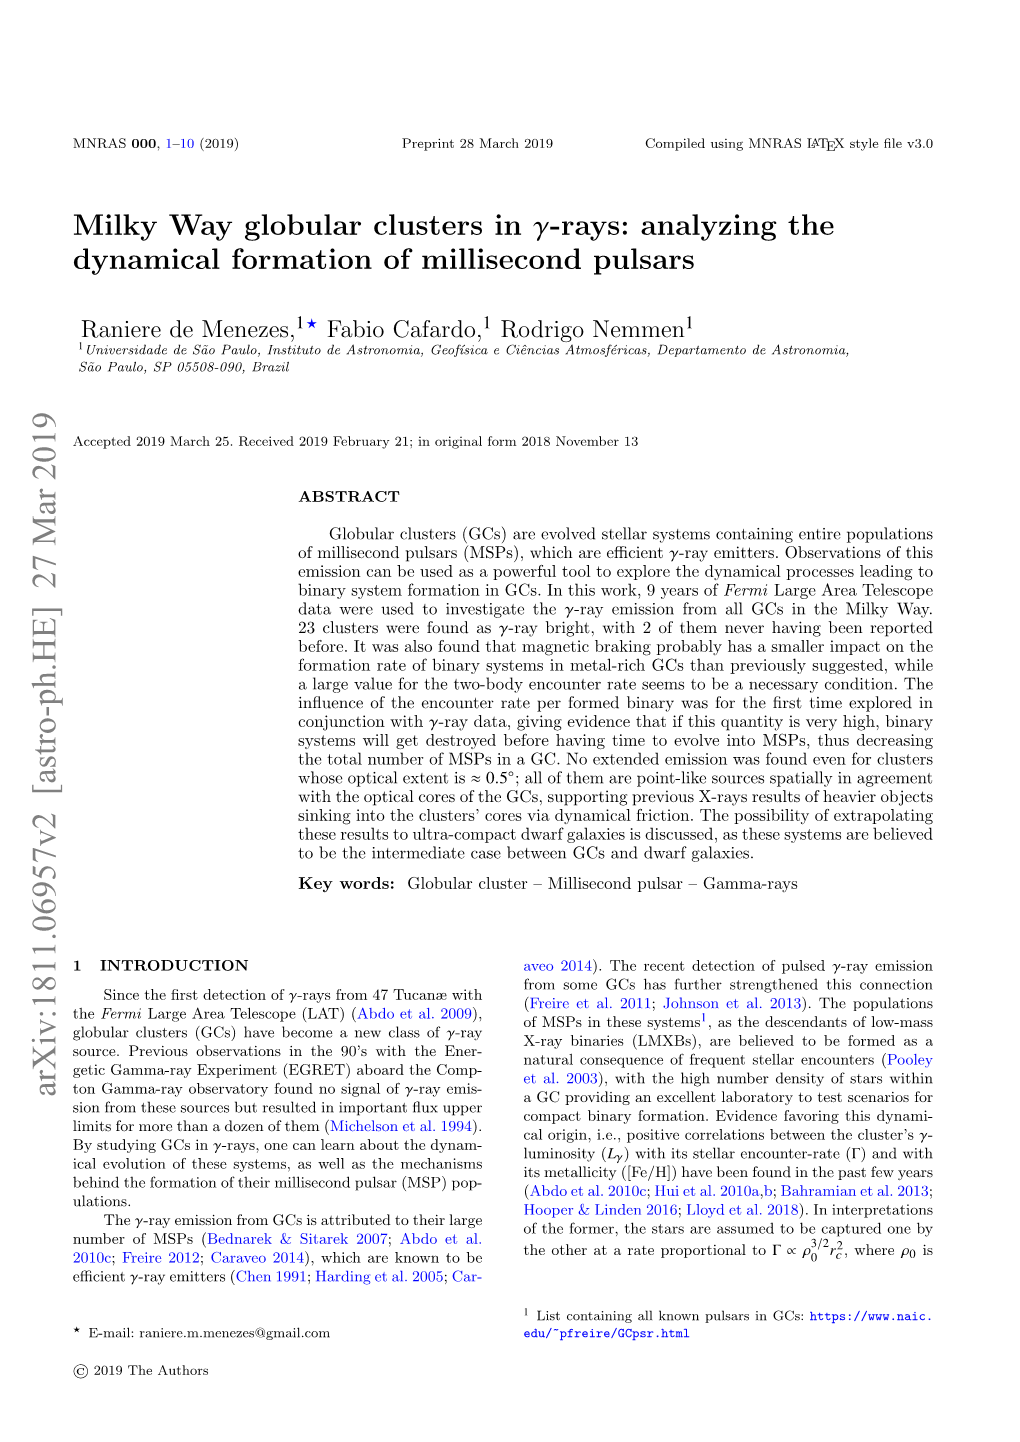 Milky Way Globular Clusters in Γ-Rays: Analyzing the Dynamical Formation of Millisecond Pulsars